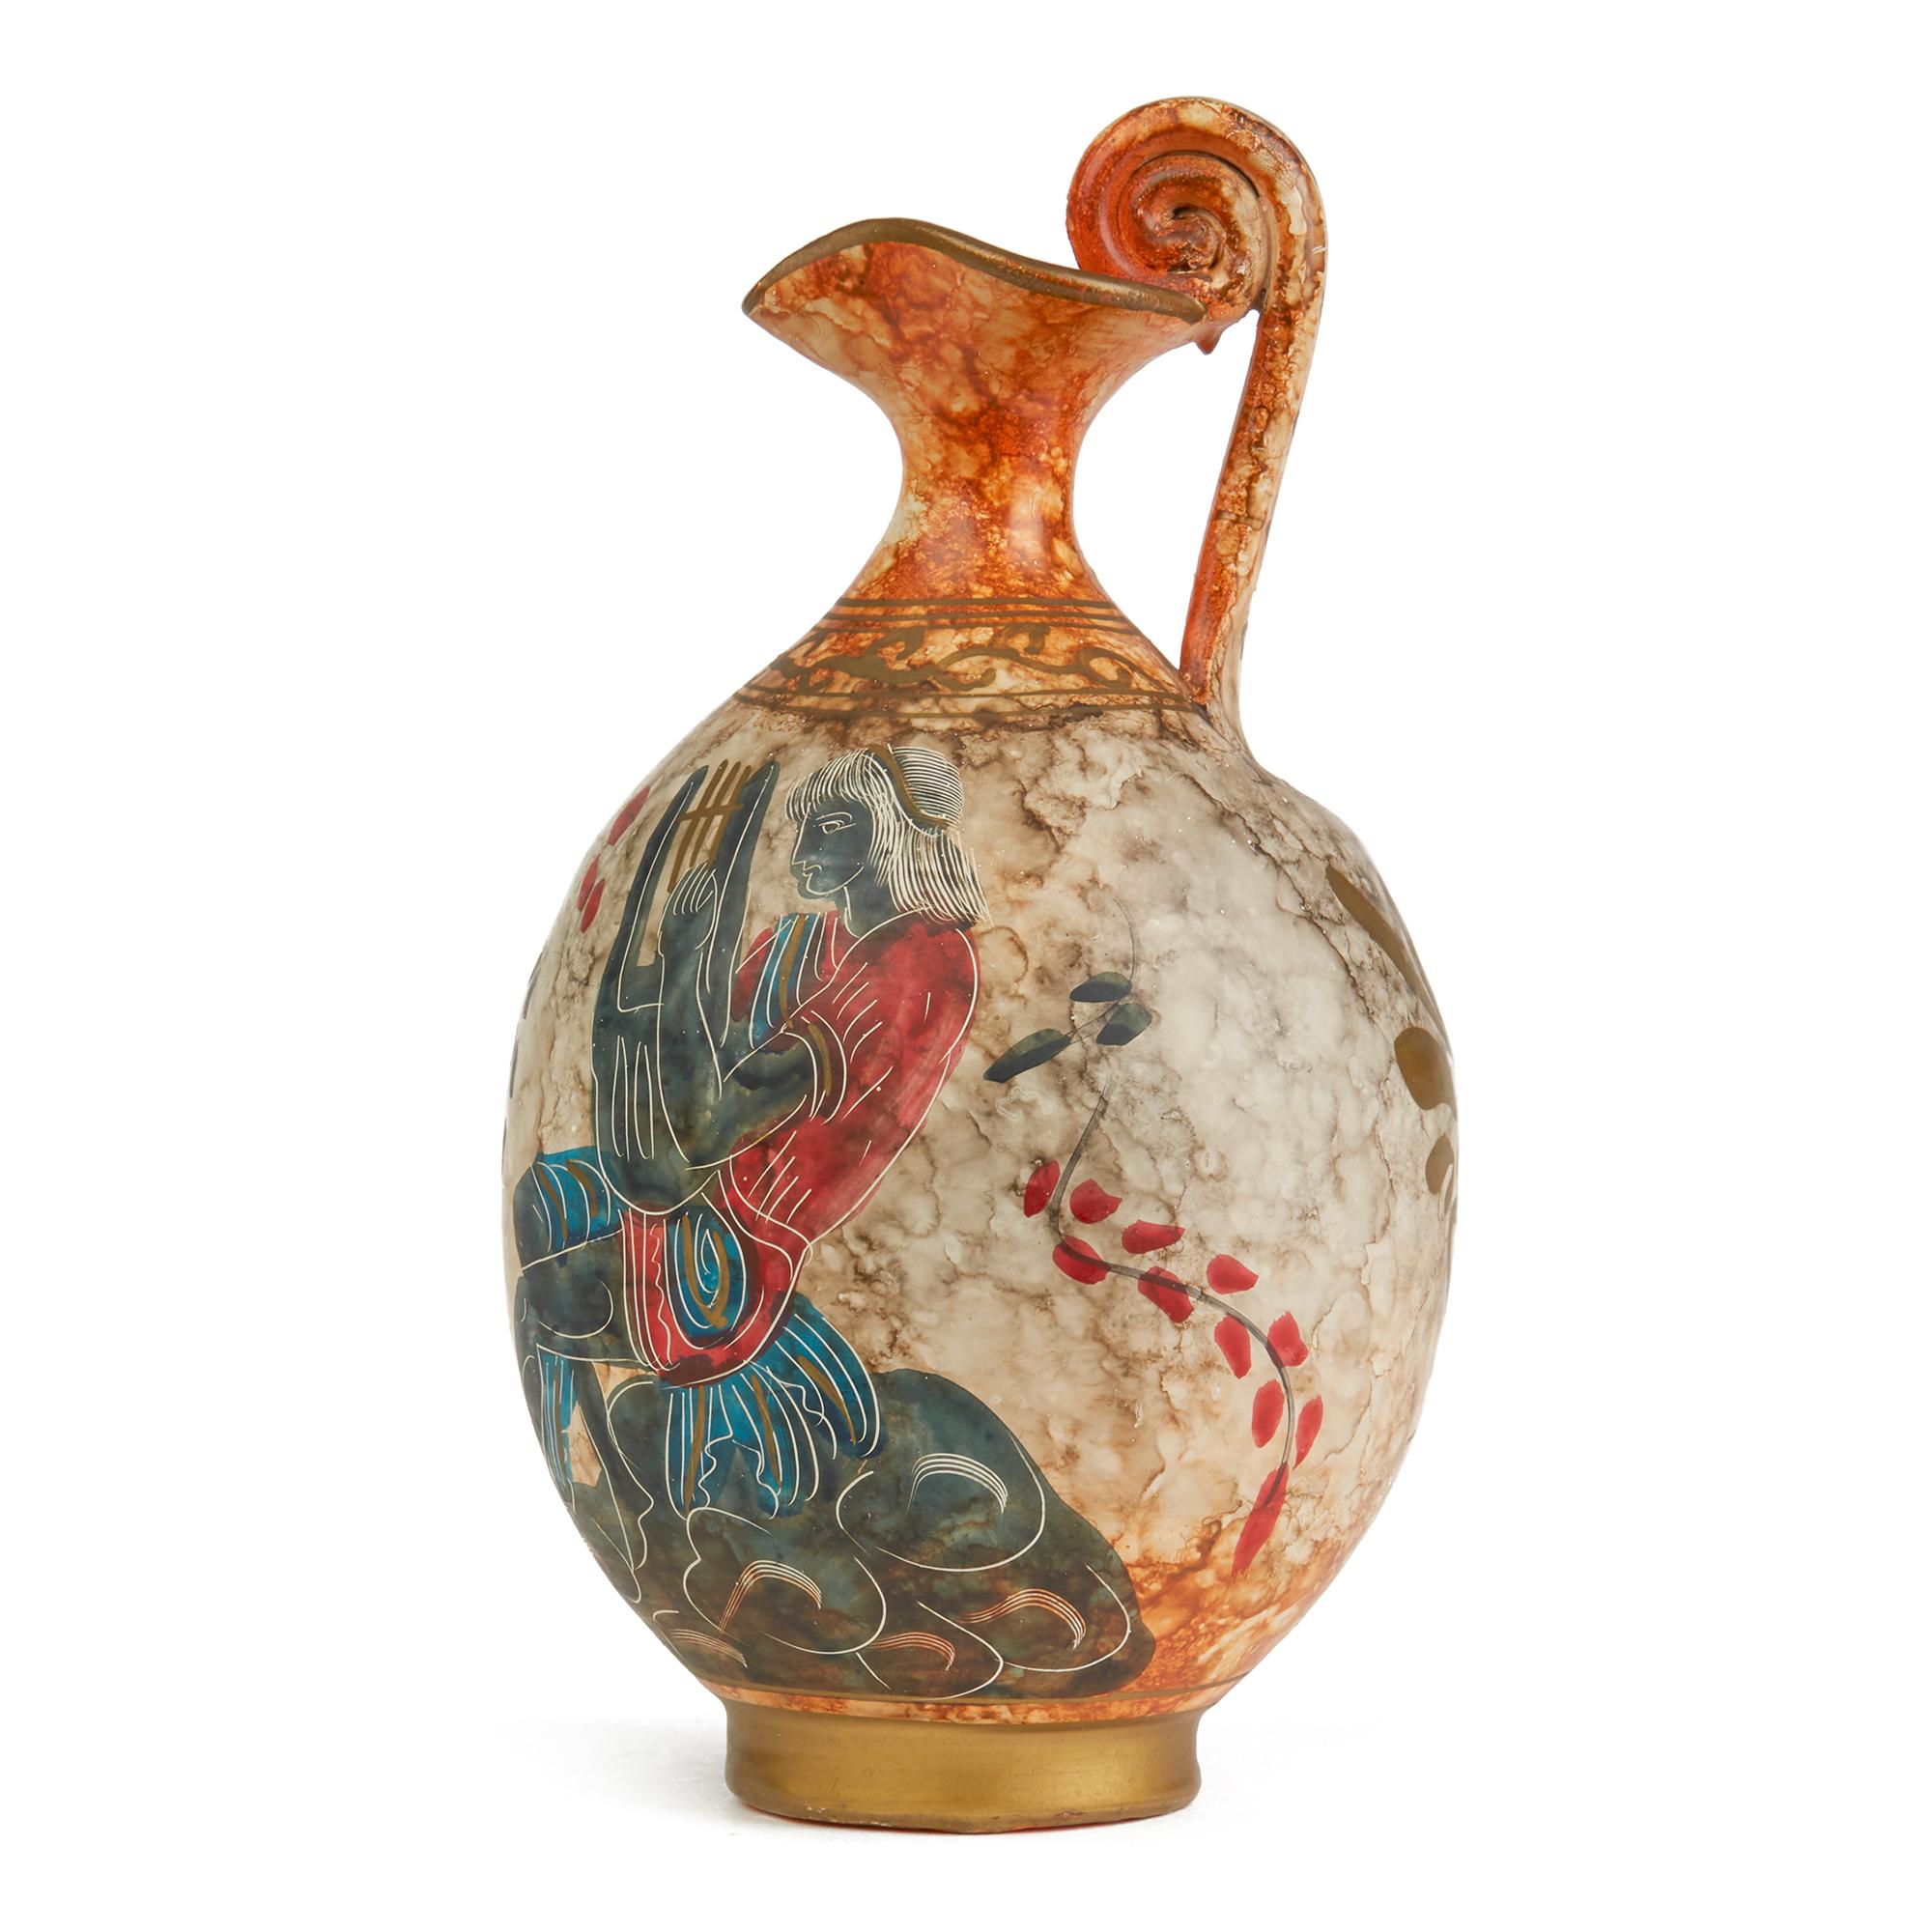 Midcentury Italian Fantoni Attributed Classical Design Art Pottery Jug In Good Condition For Sale In Bishop's Stortford, Hertfordshire